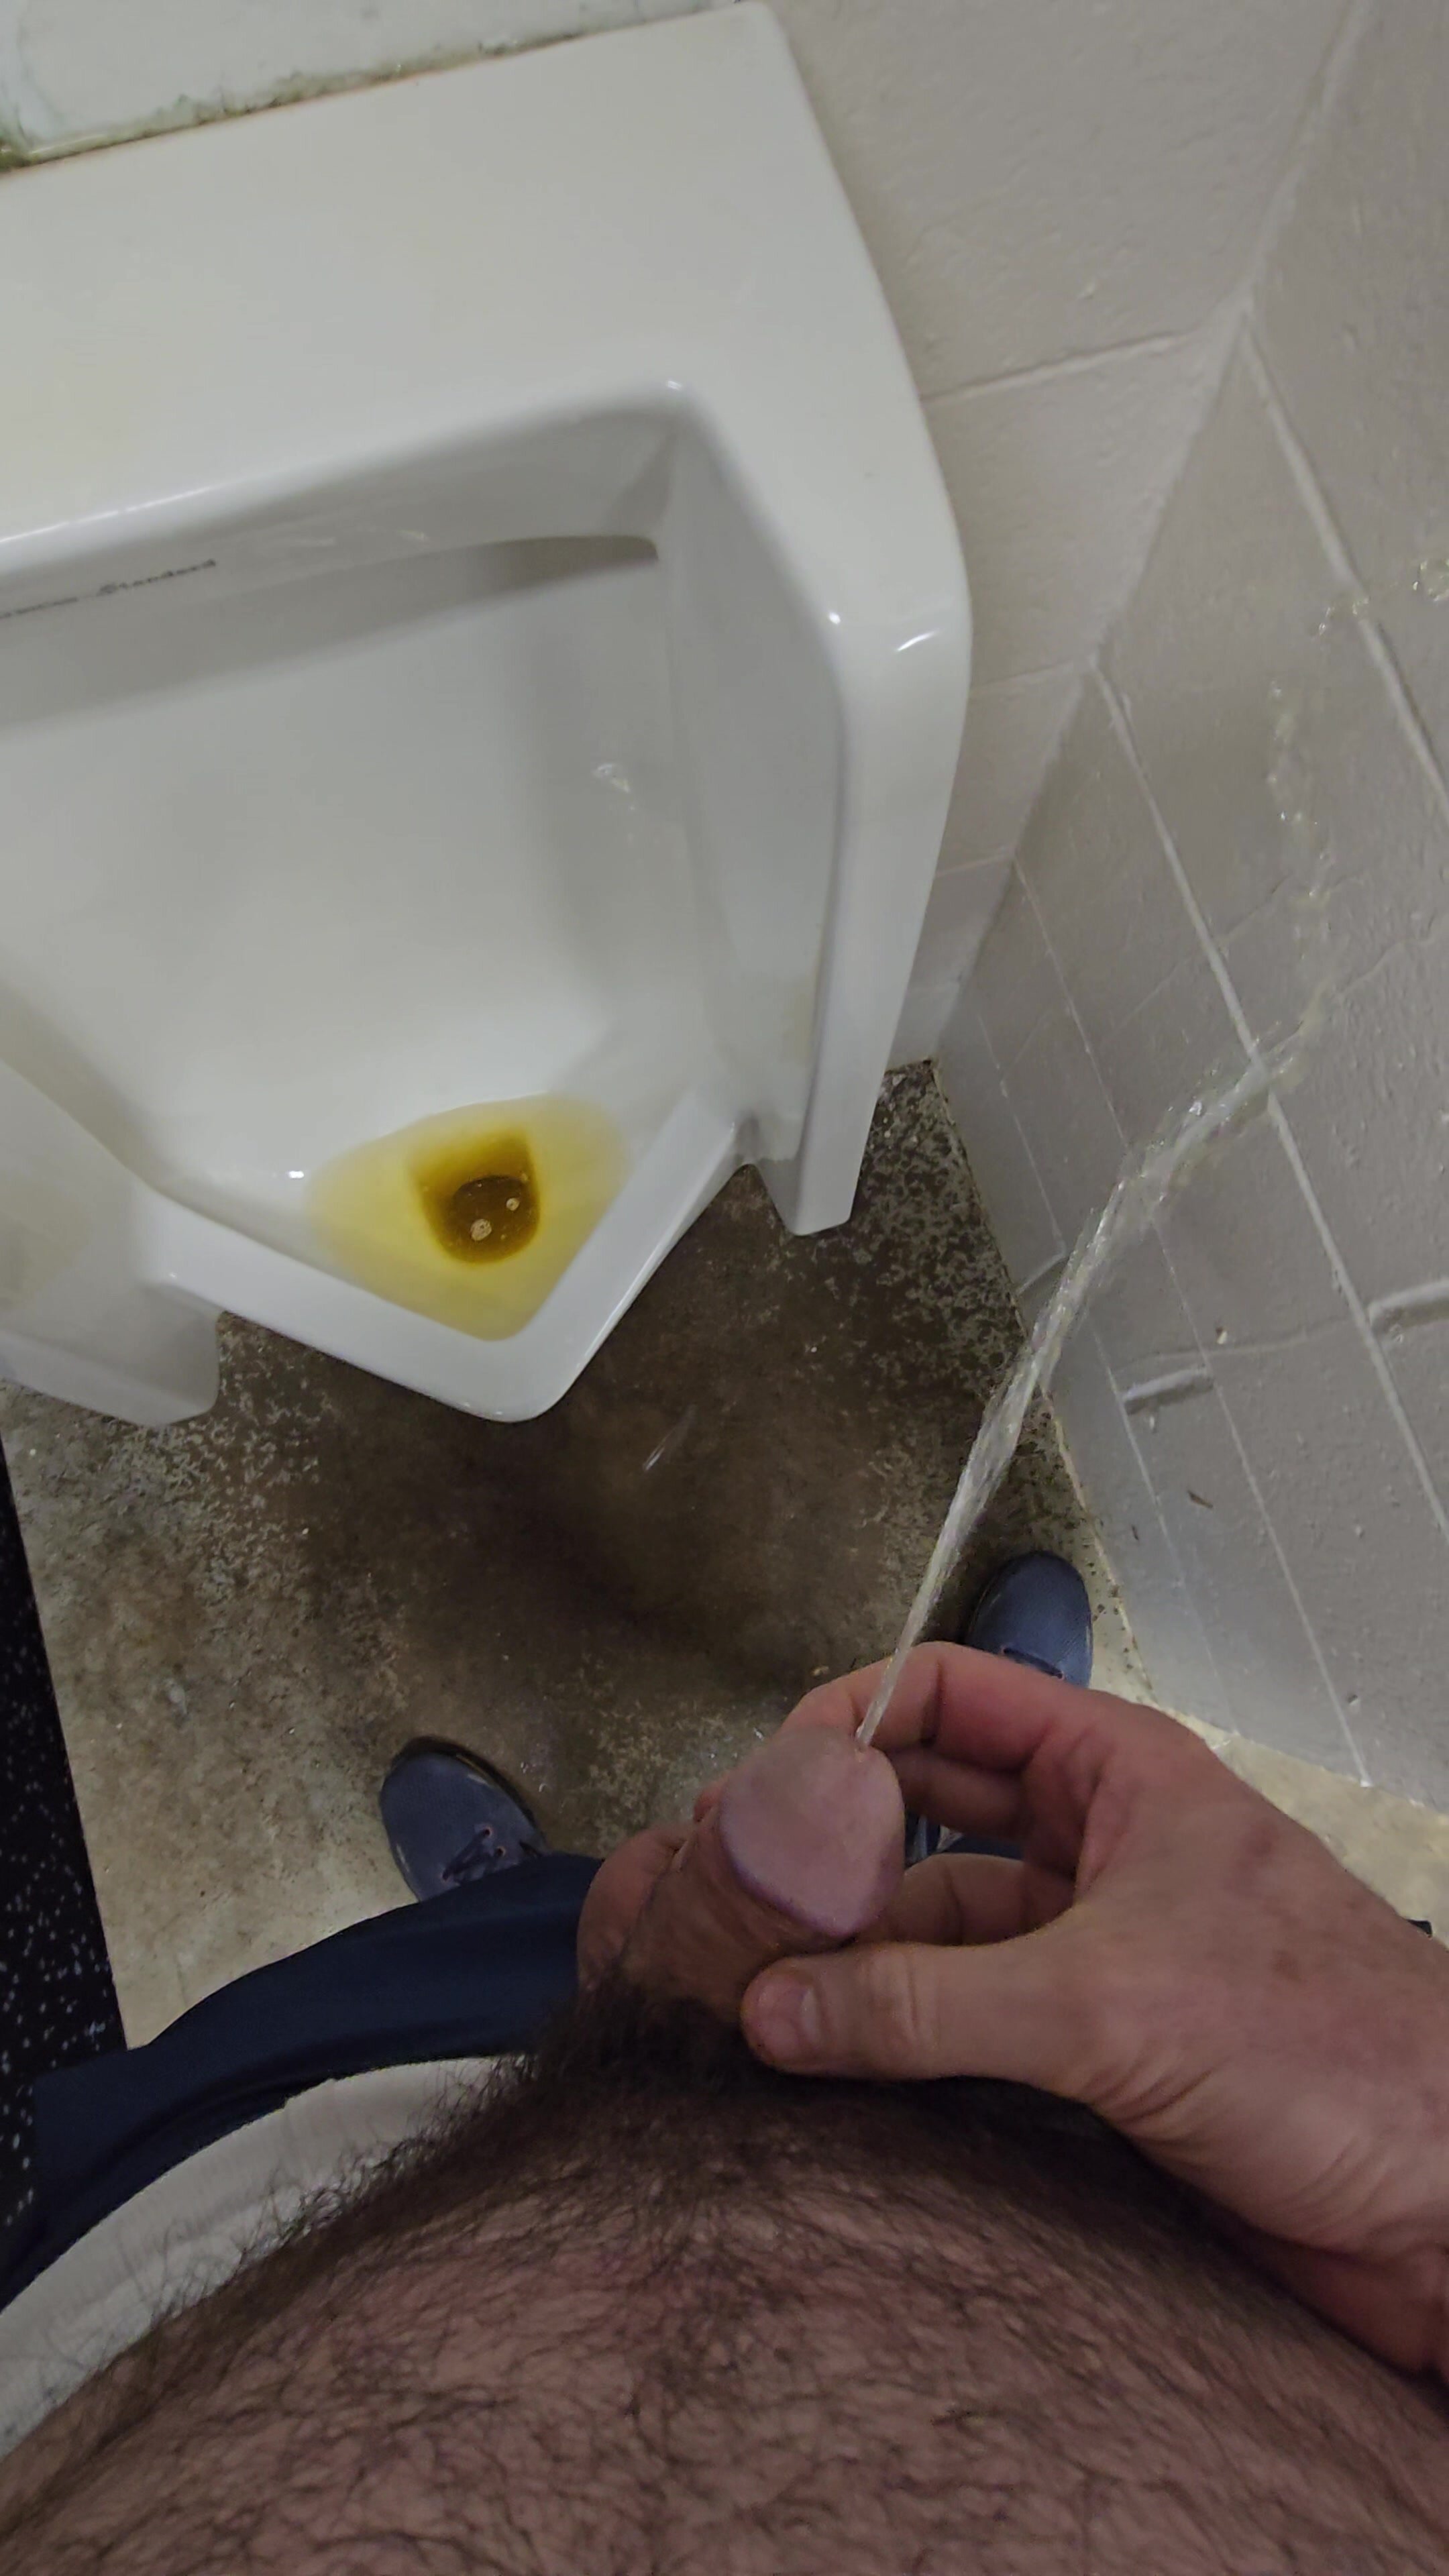 Piss Trash Campground Toilet in Tighty Whities 7